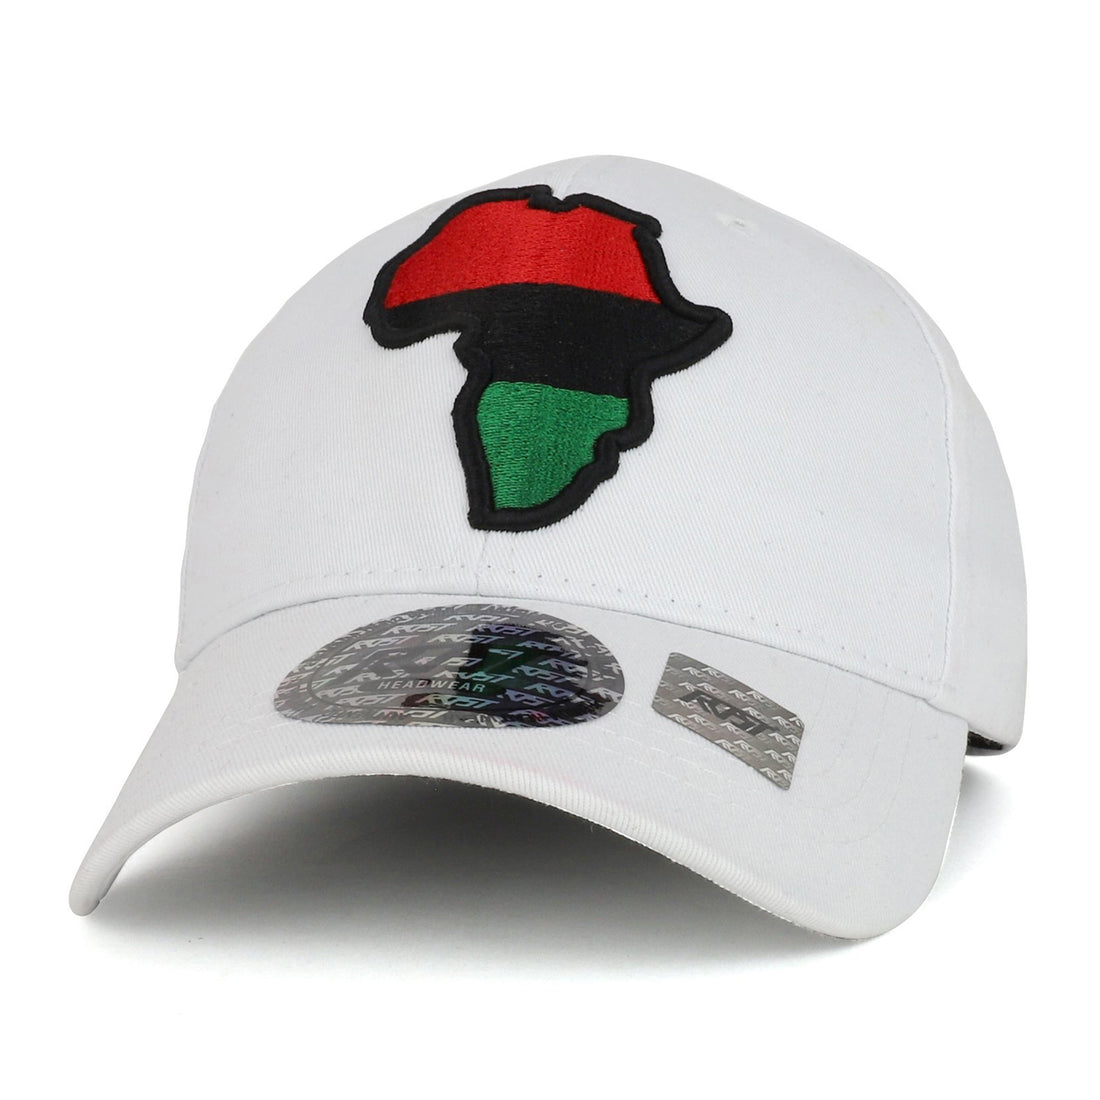 Trendy Apparel Shop Red Black Green Africa Map Embroidered Structured Baseball Cap